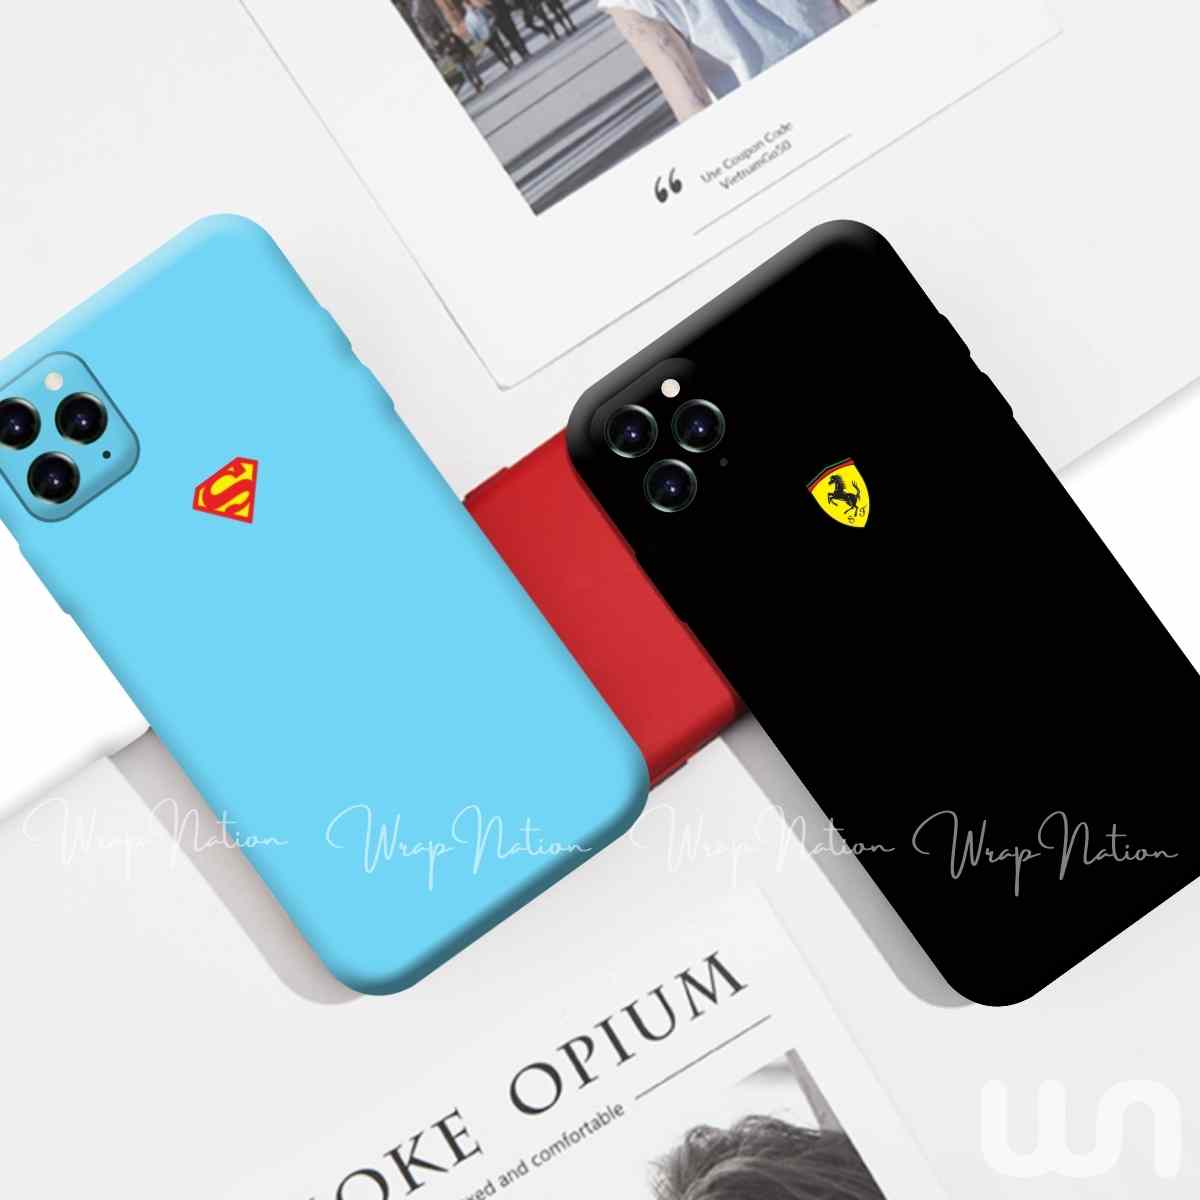 Copy of Copy of Color Silicon Cases with Metal Logo for Iphone X/Xs